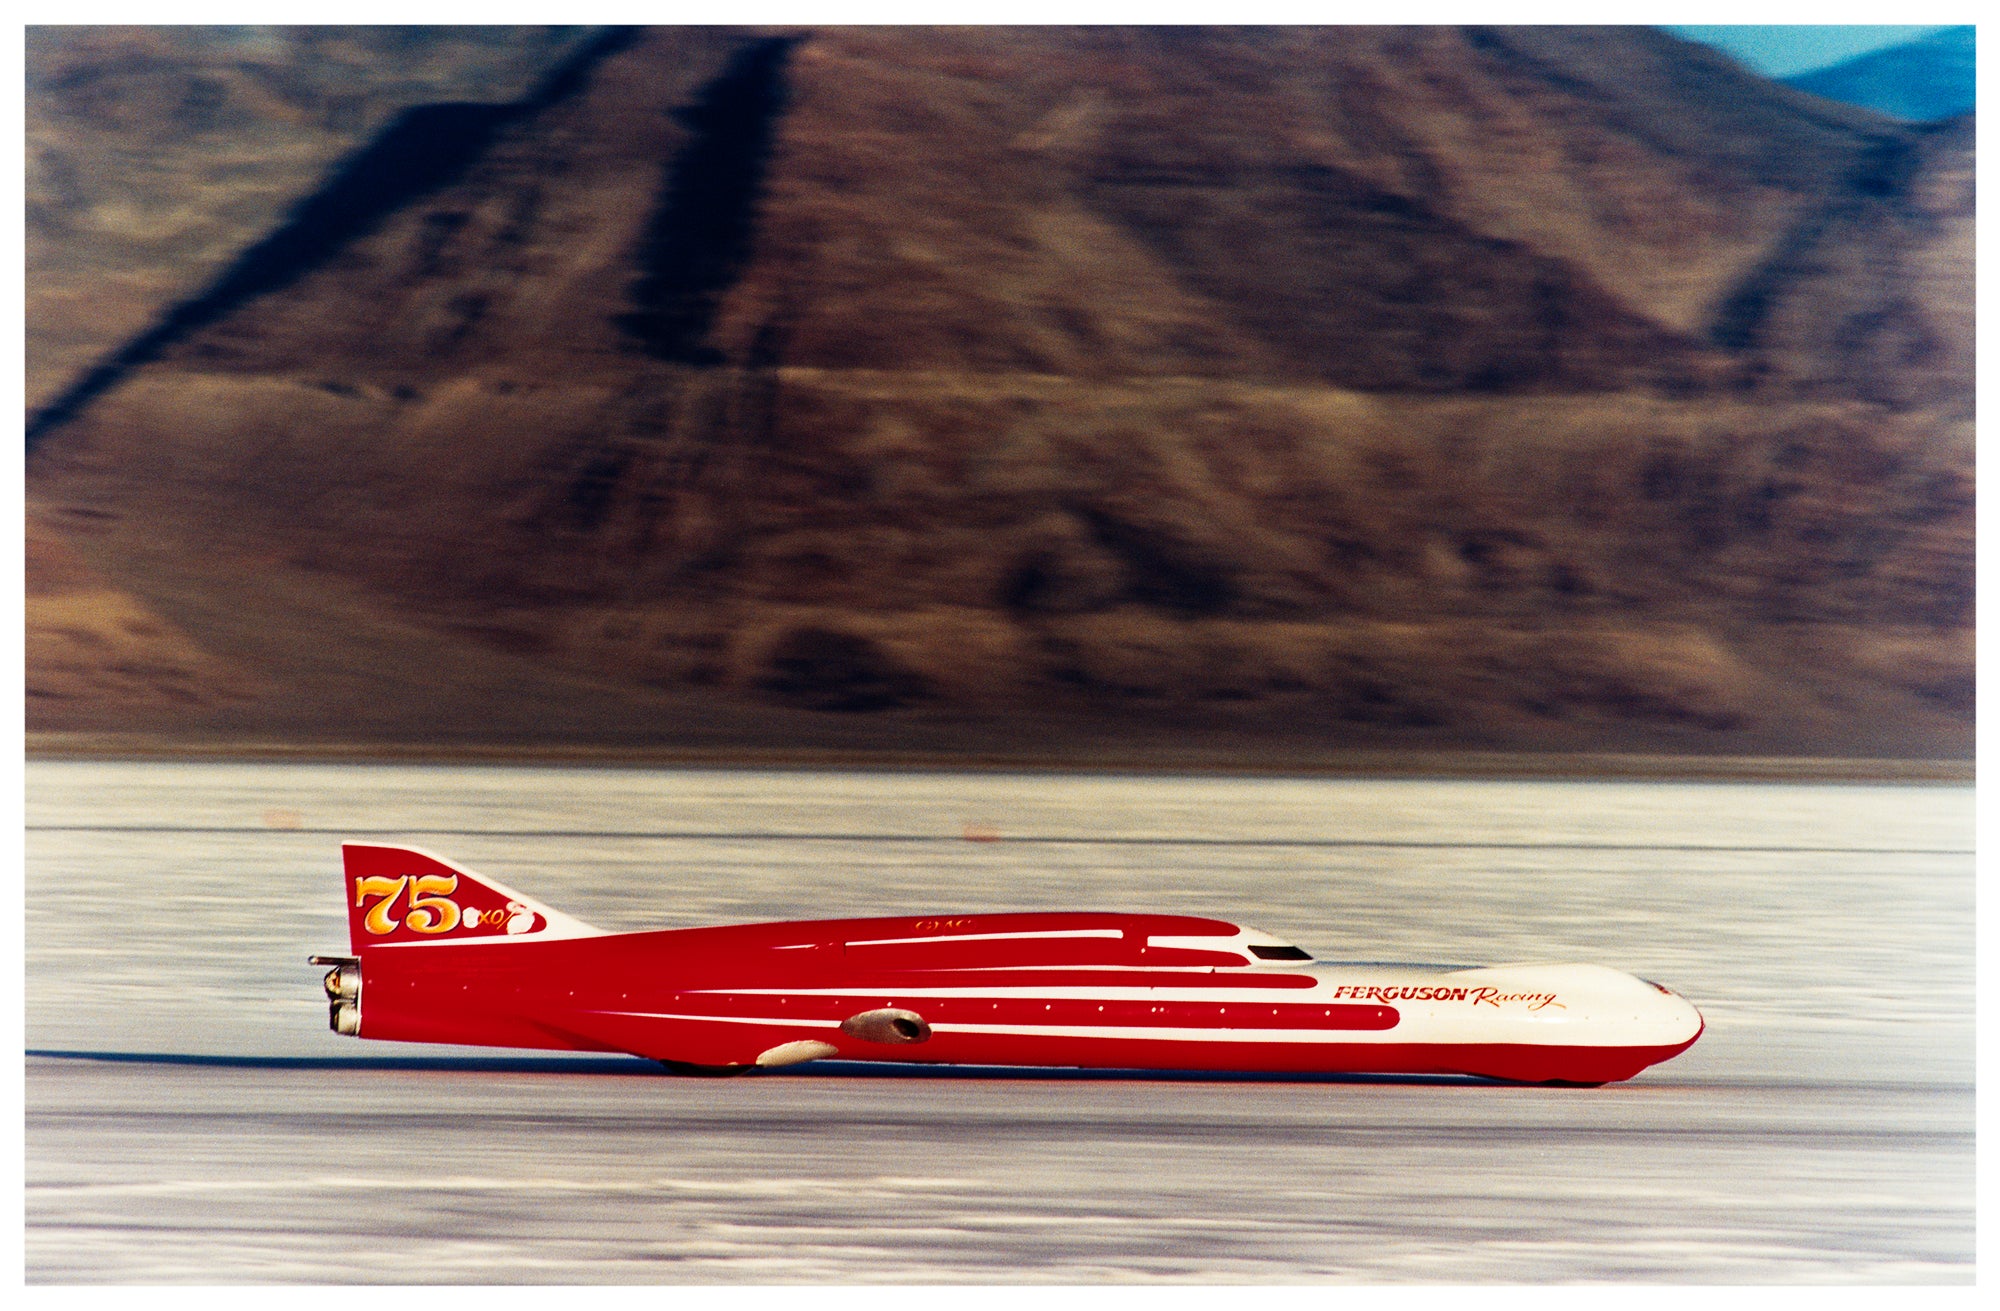 Photograph by Richard Heeps.  A Red Ferguson Racing Streamliner sits on a smooth salt flat with mountains in the background.